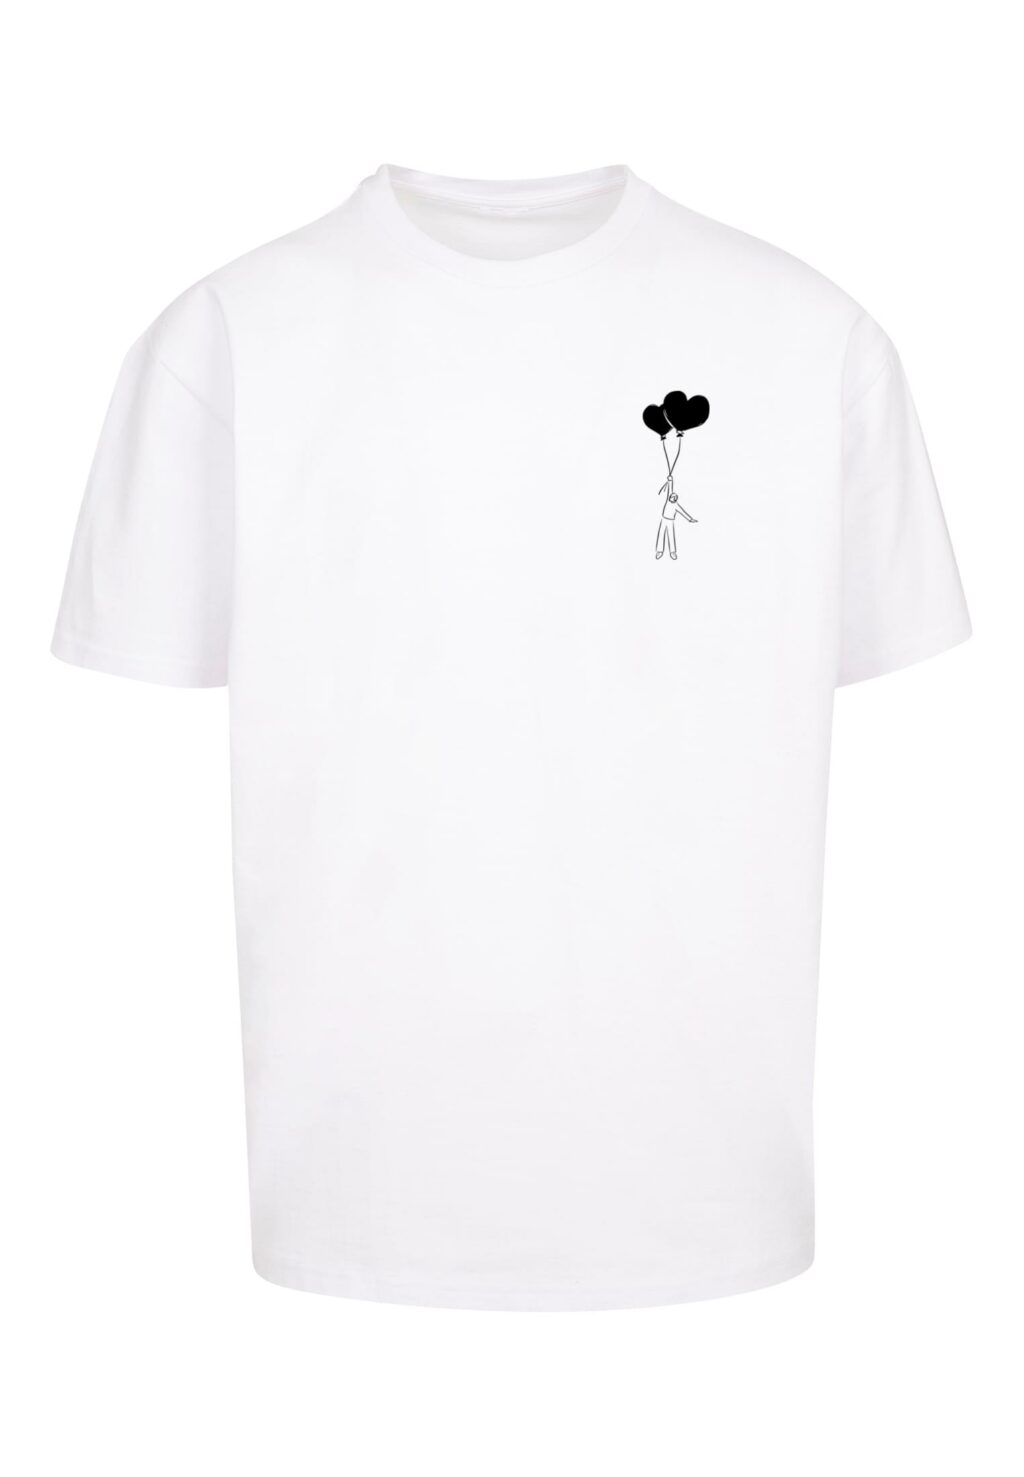 Love In The Air Heavy Oversize Tee white MP0008452